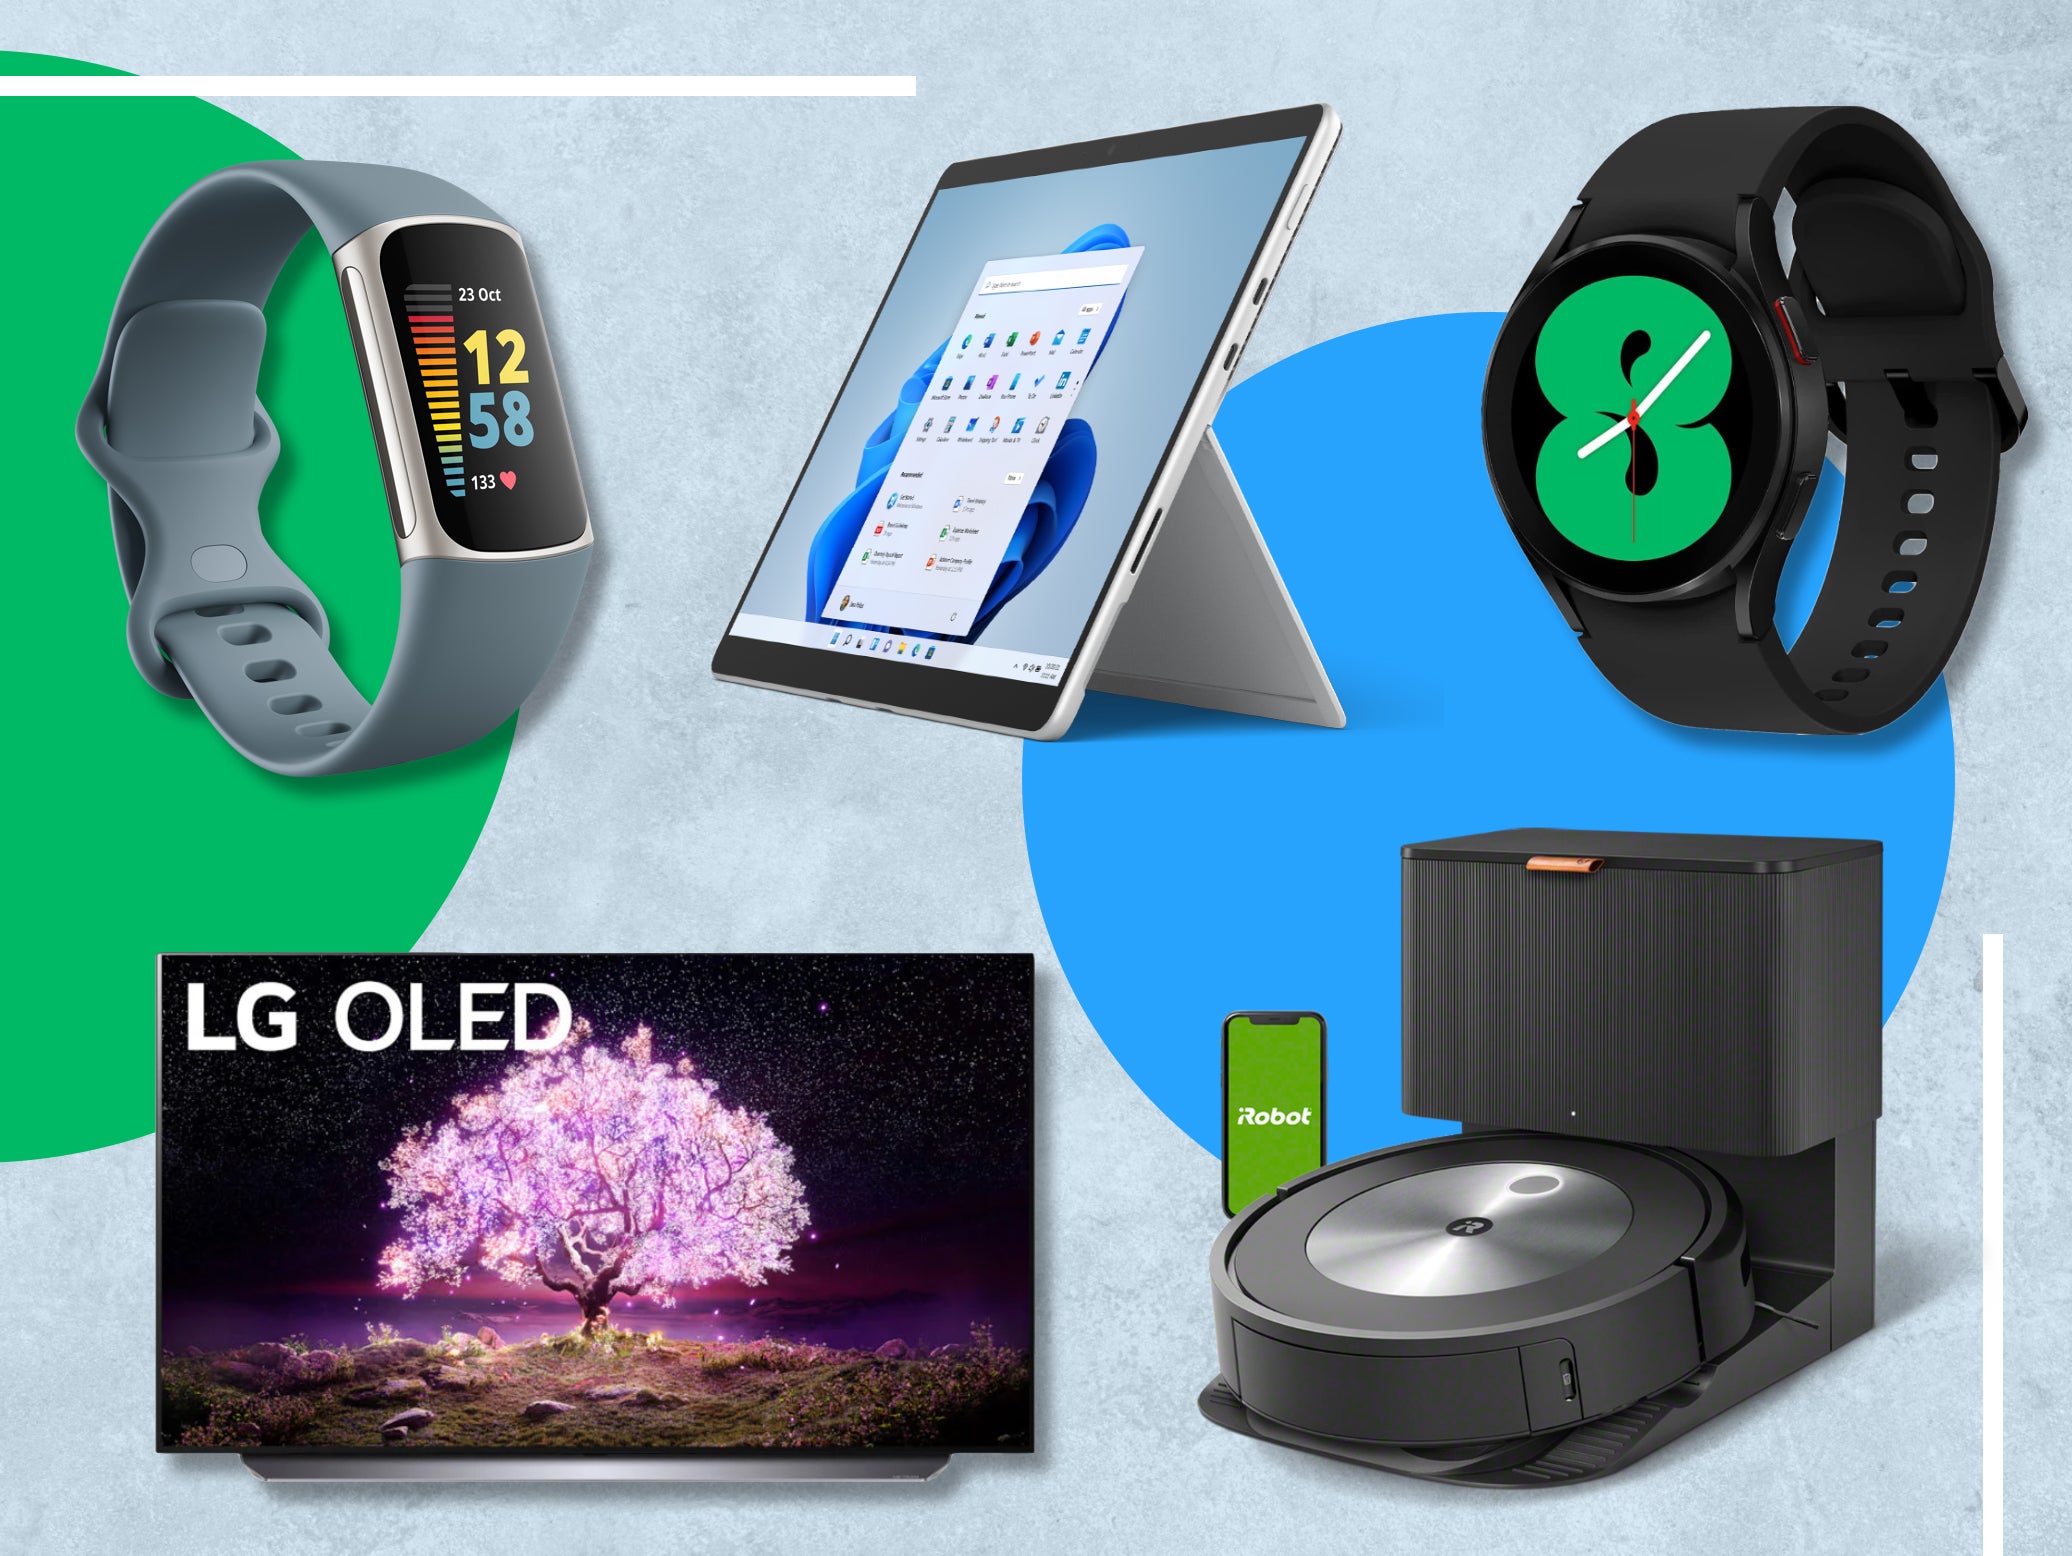 From robo-hoovers to fitness bands, our tech writer is predicting a few bargains in the mix